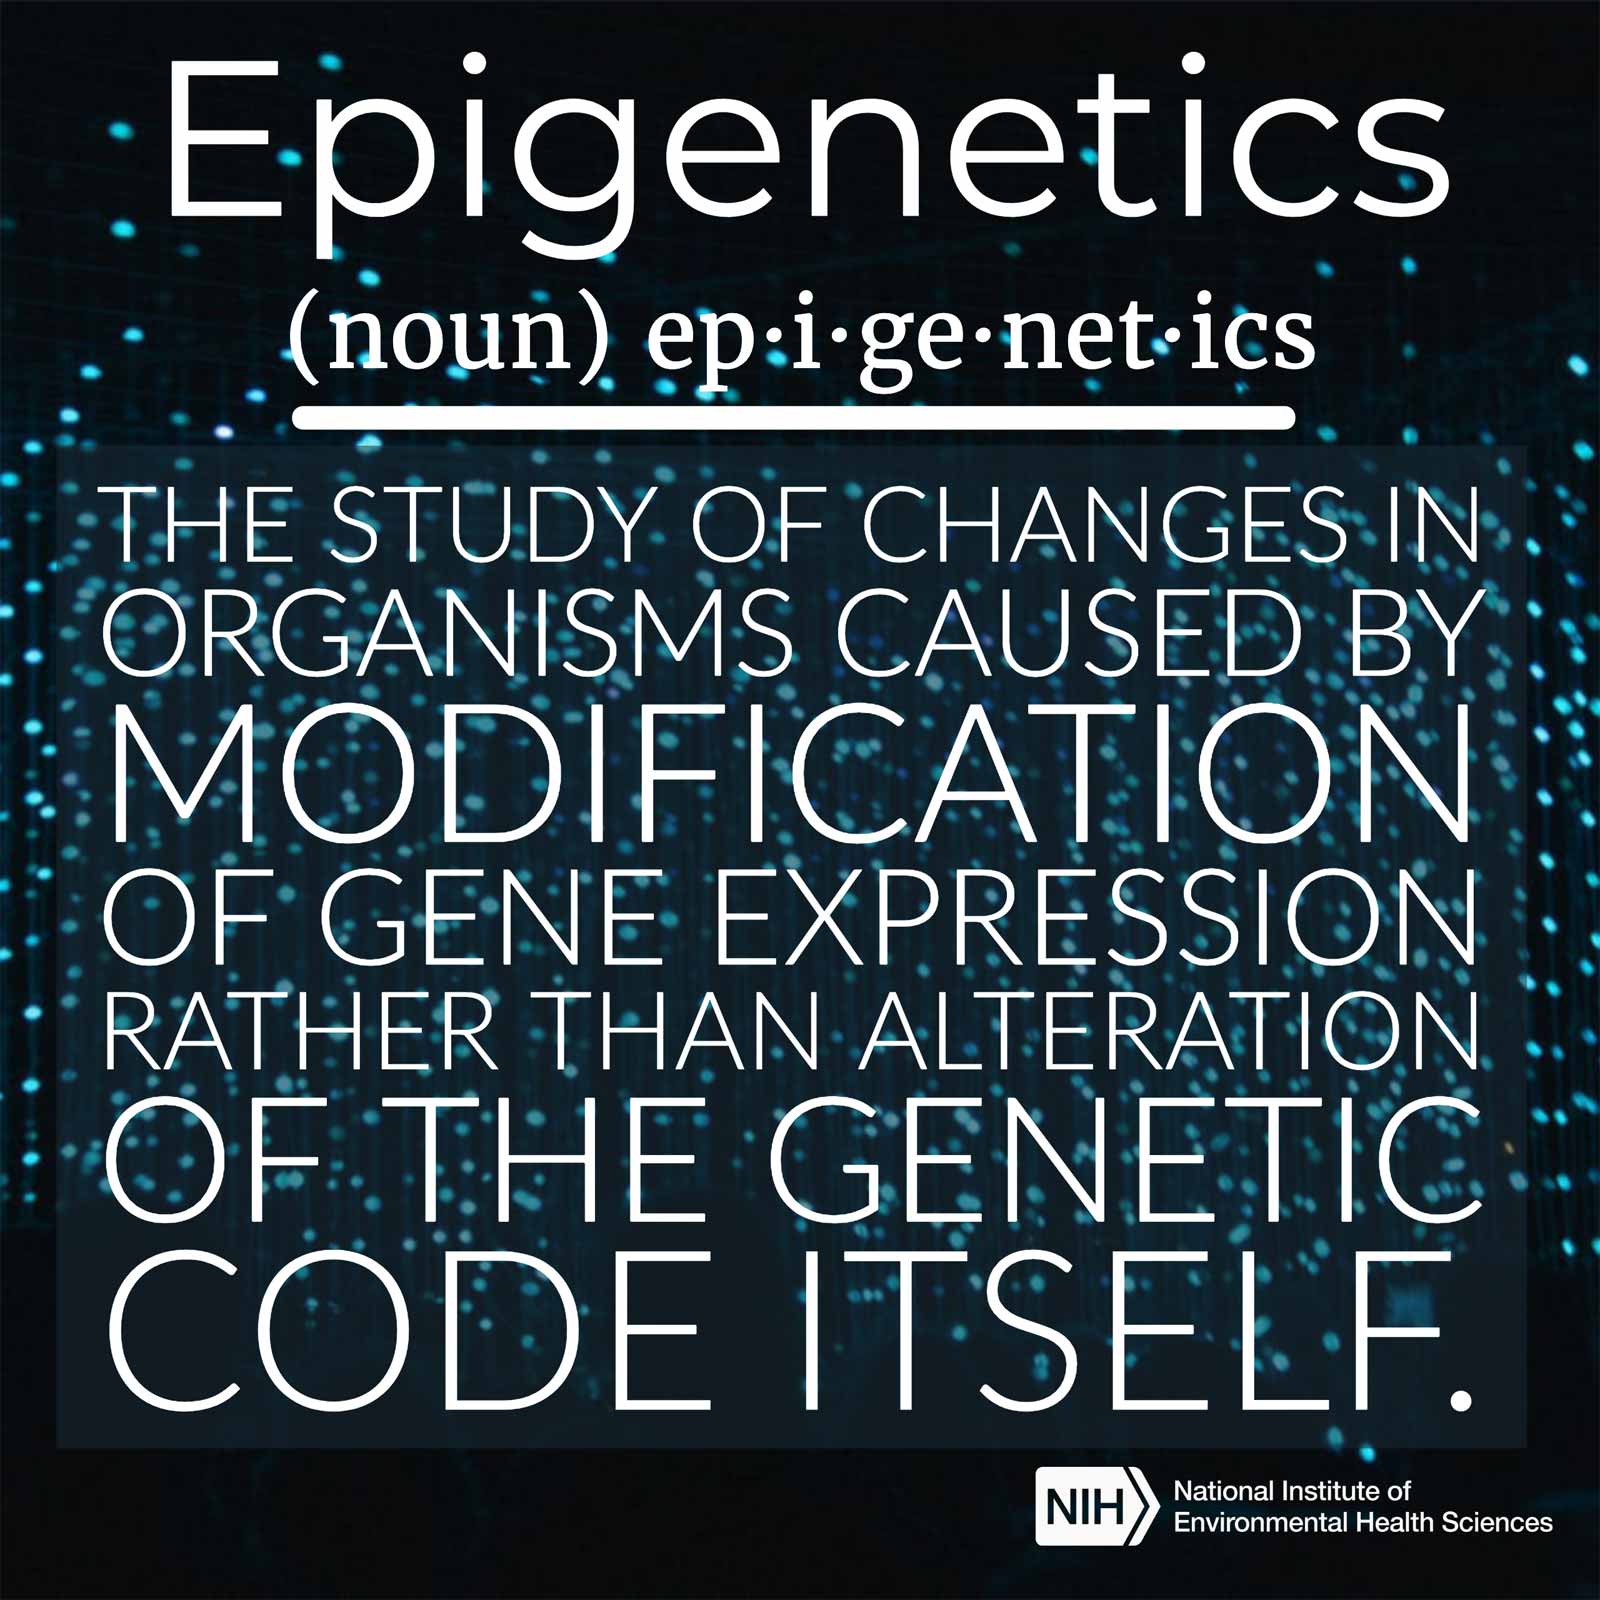 Epigenetics (noun) defined as 'the study of changes in organisms caused by modification of gene expression rather than the alteration of the genetic code itself.'